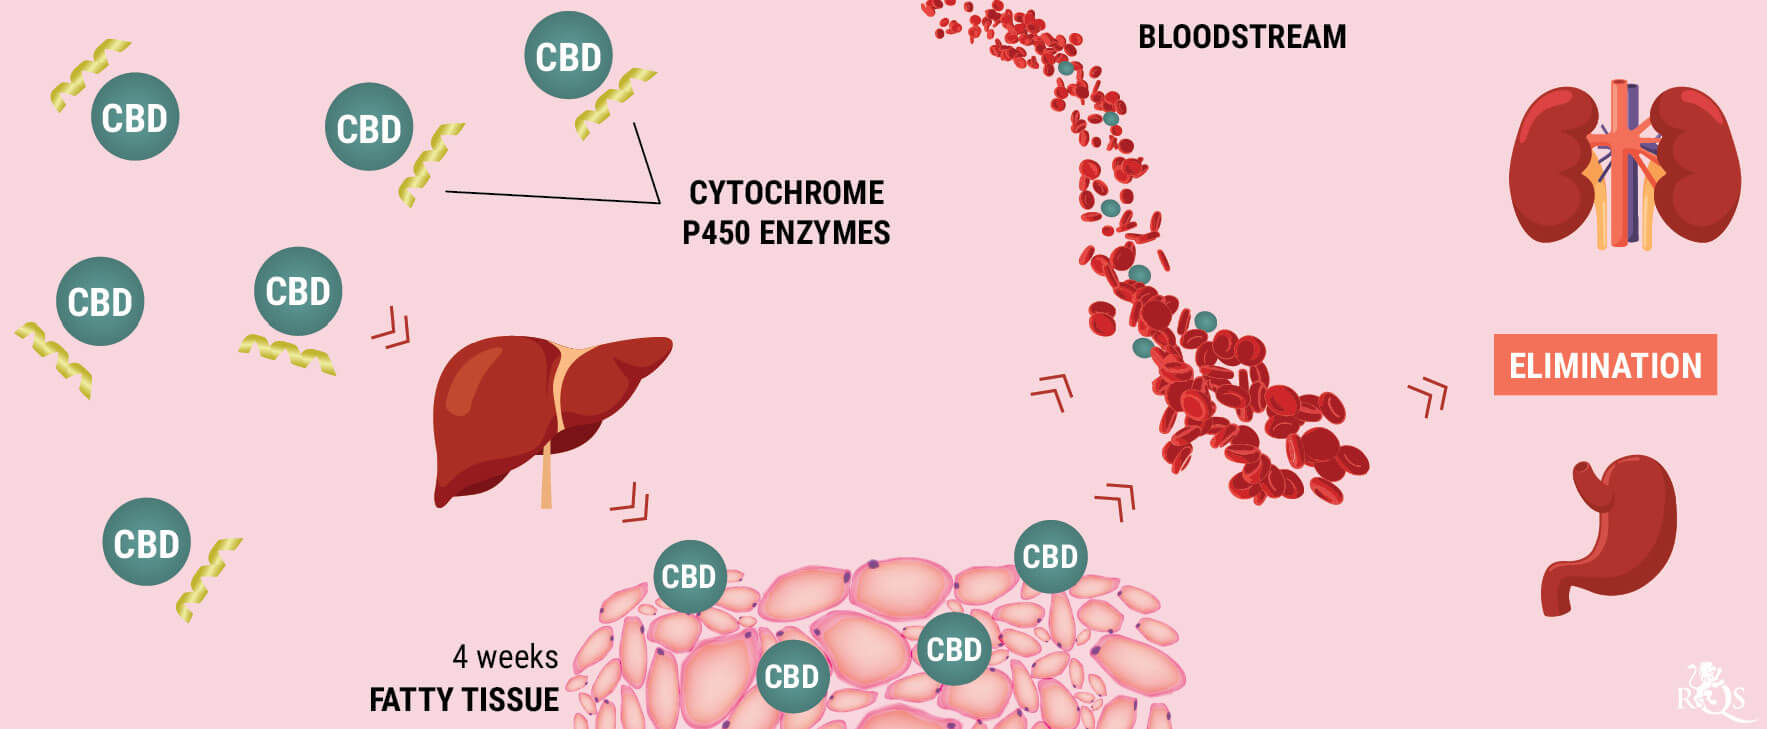 How Does the Body Metabolise CBD?